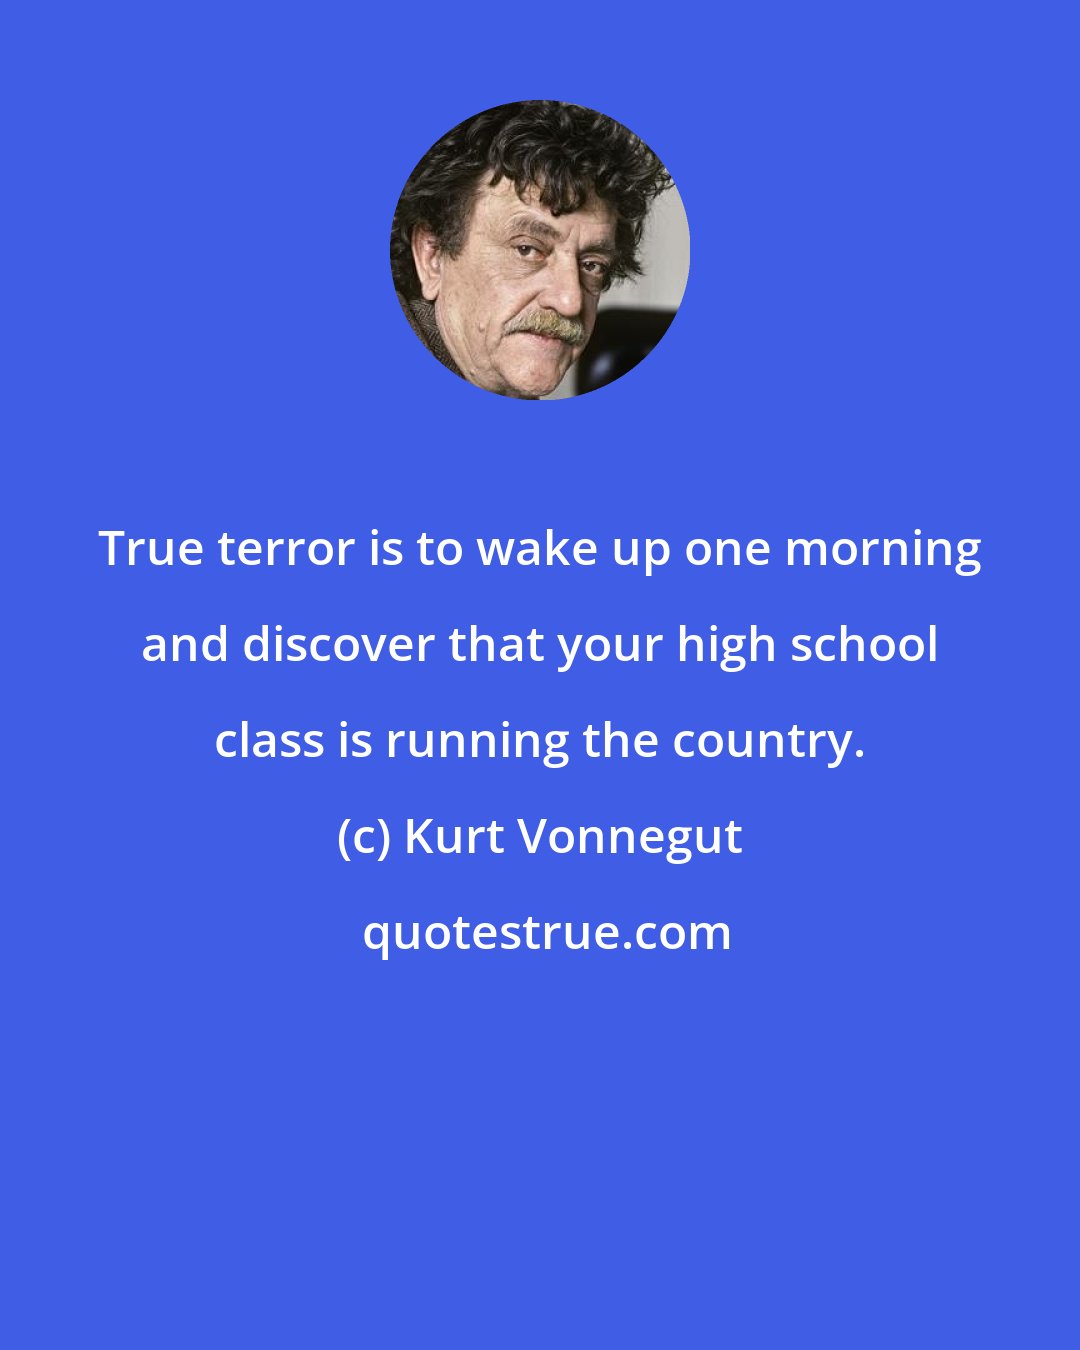 Kurt Vonnegut: True terror is to wake up one morning and discover that your high school class is running the country.